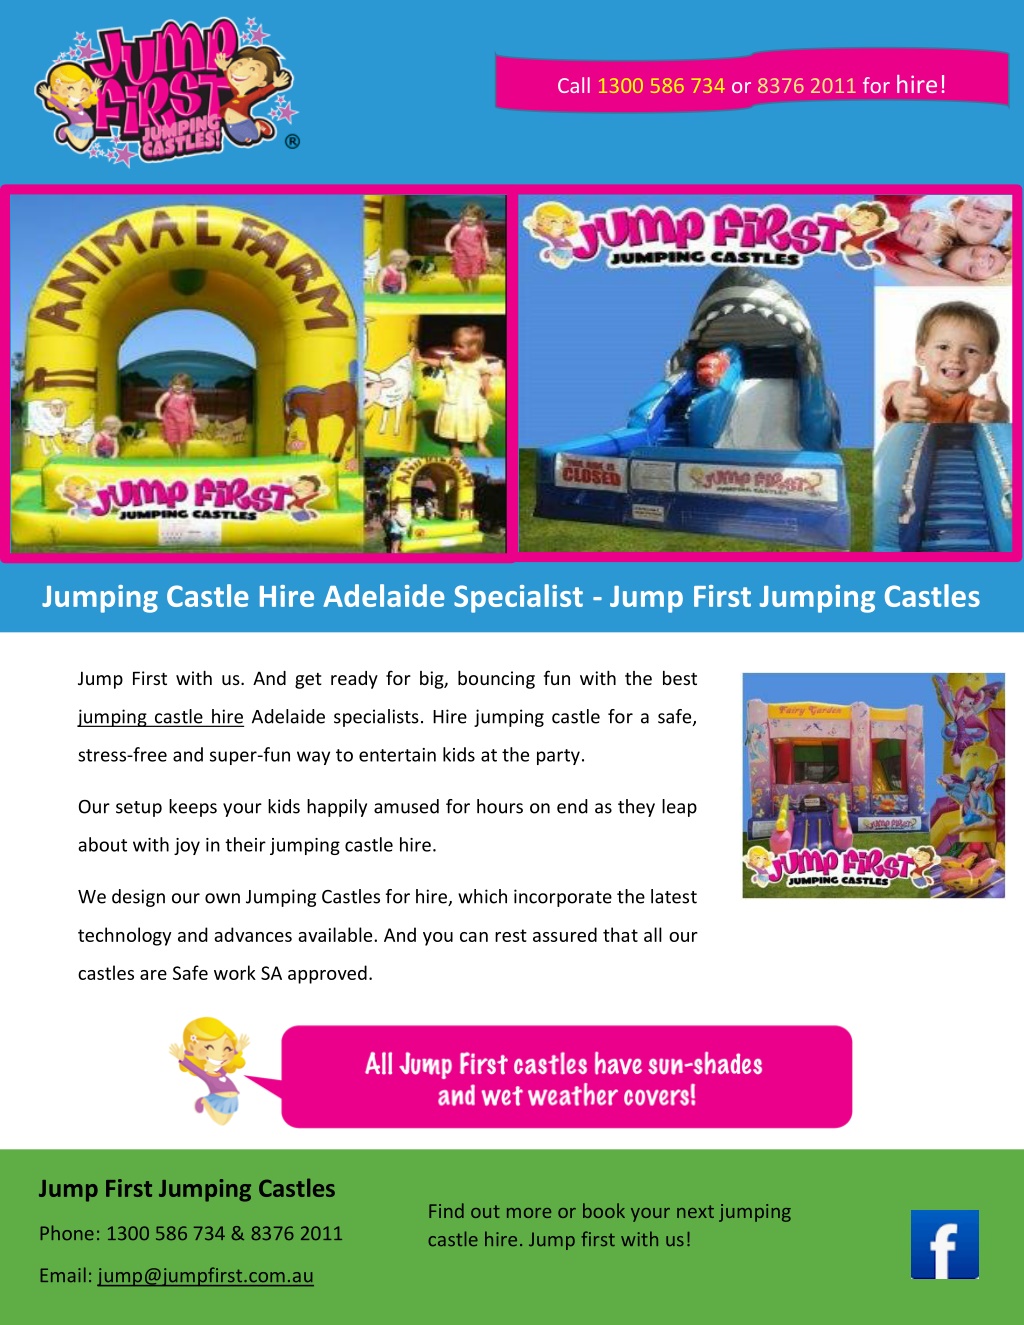 PPT Jumping Castle Hire Adelaide Specialist Jump First Jumping Castles PowerPoint